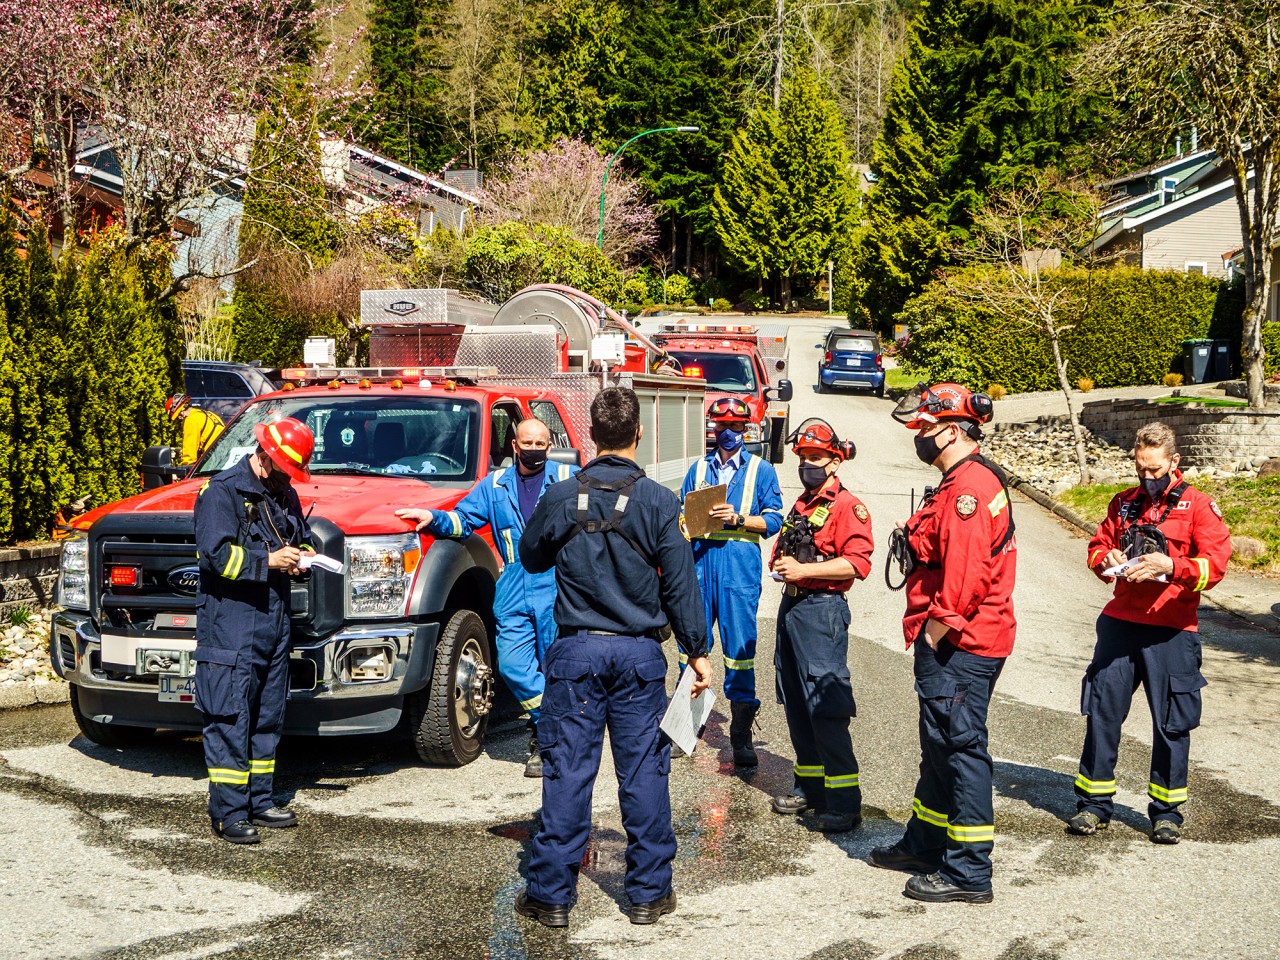 A group of firefighters prepare for wildfire training. 